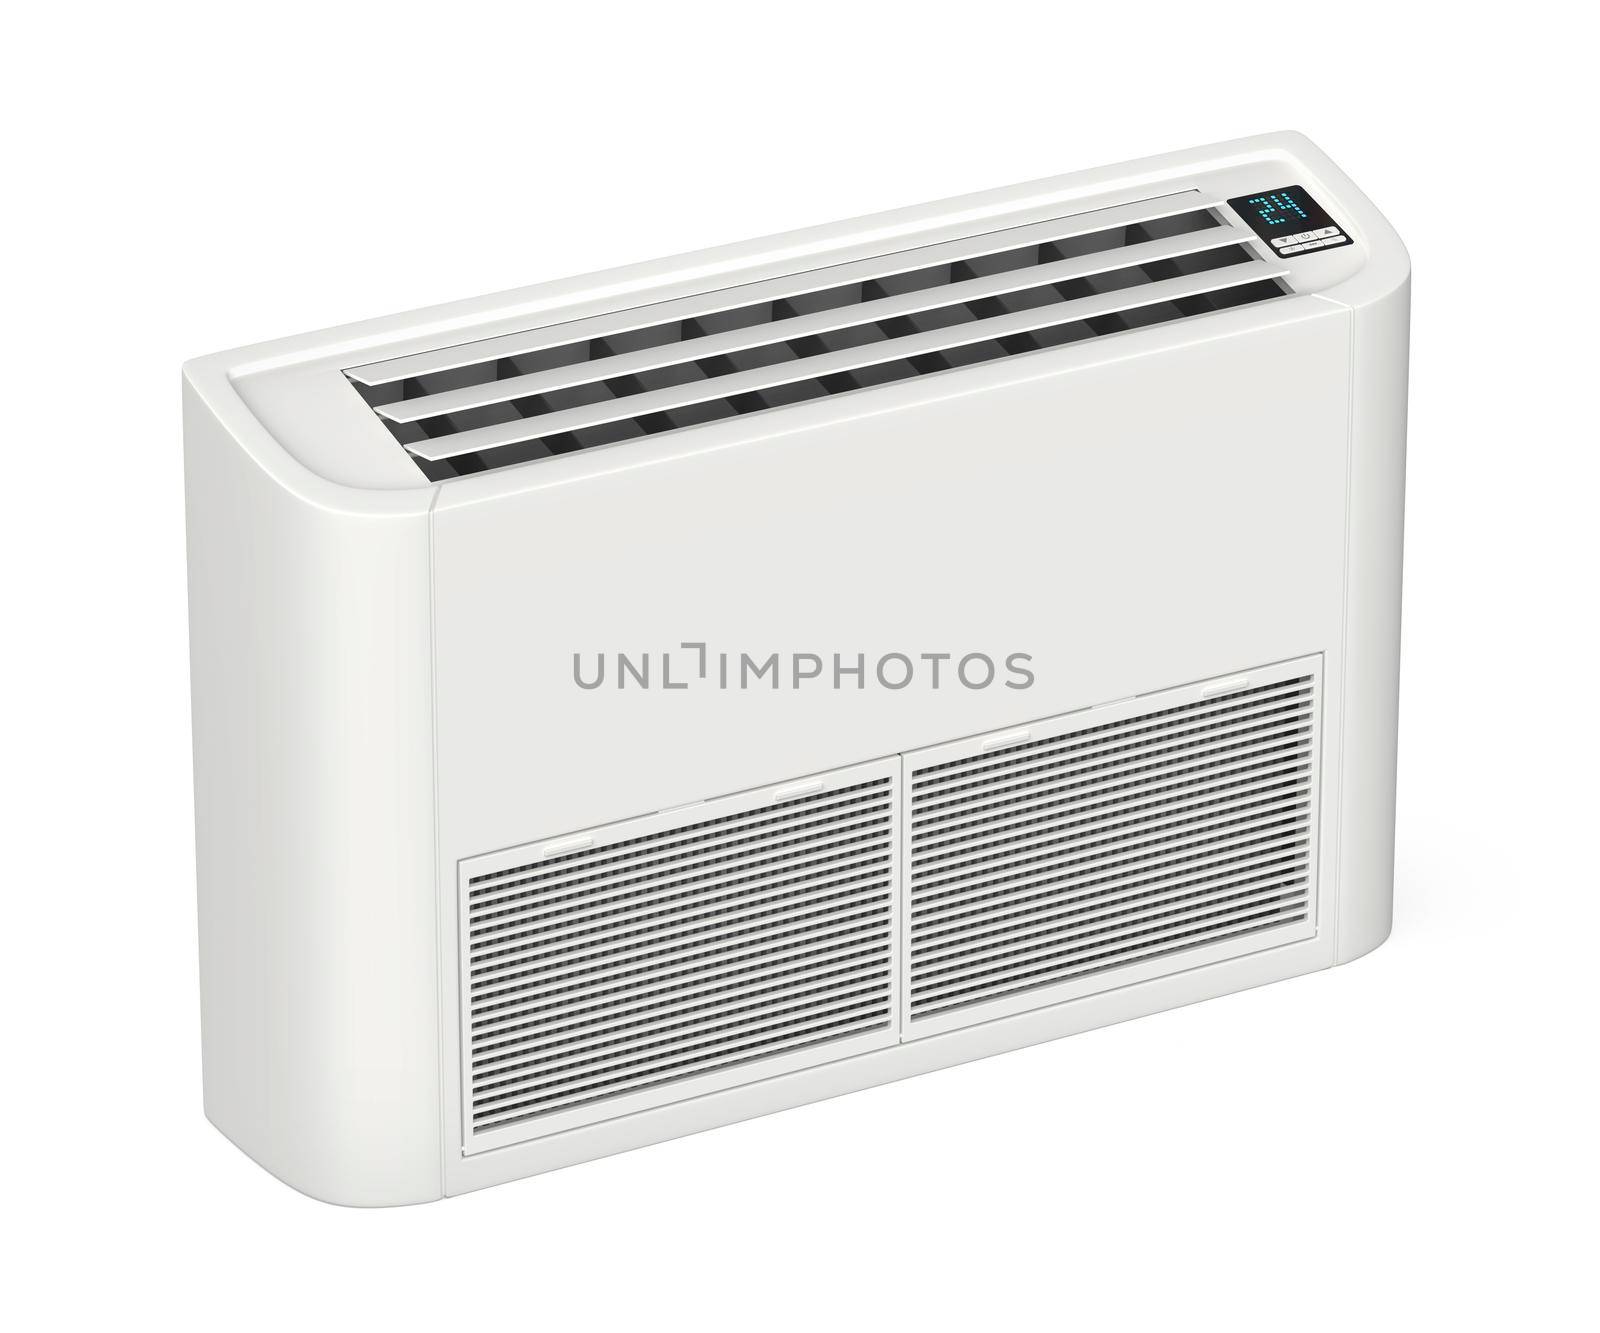 Floor mounted air conditioner on white background